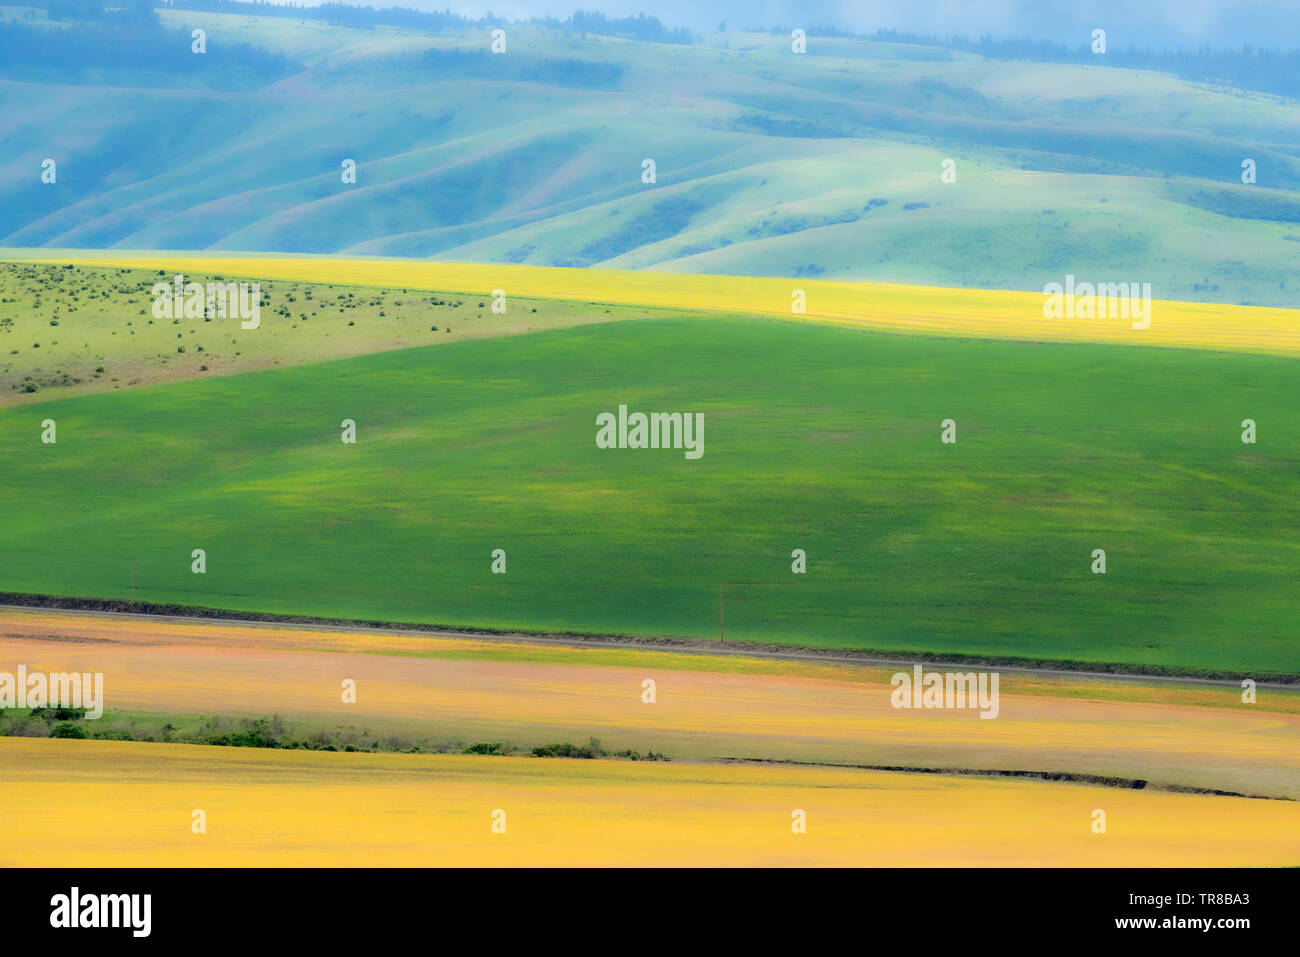 Surreal image of  wheat fields and hills in Umatilla County, Oregon. Stock Photo